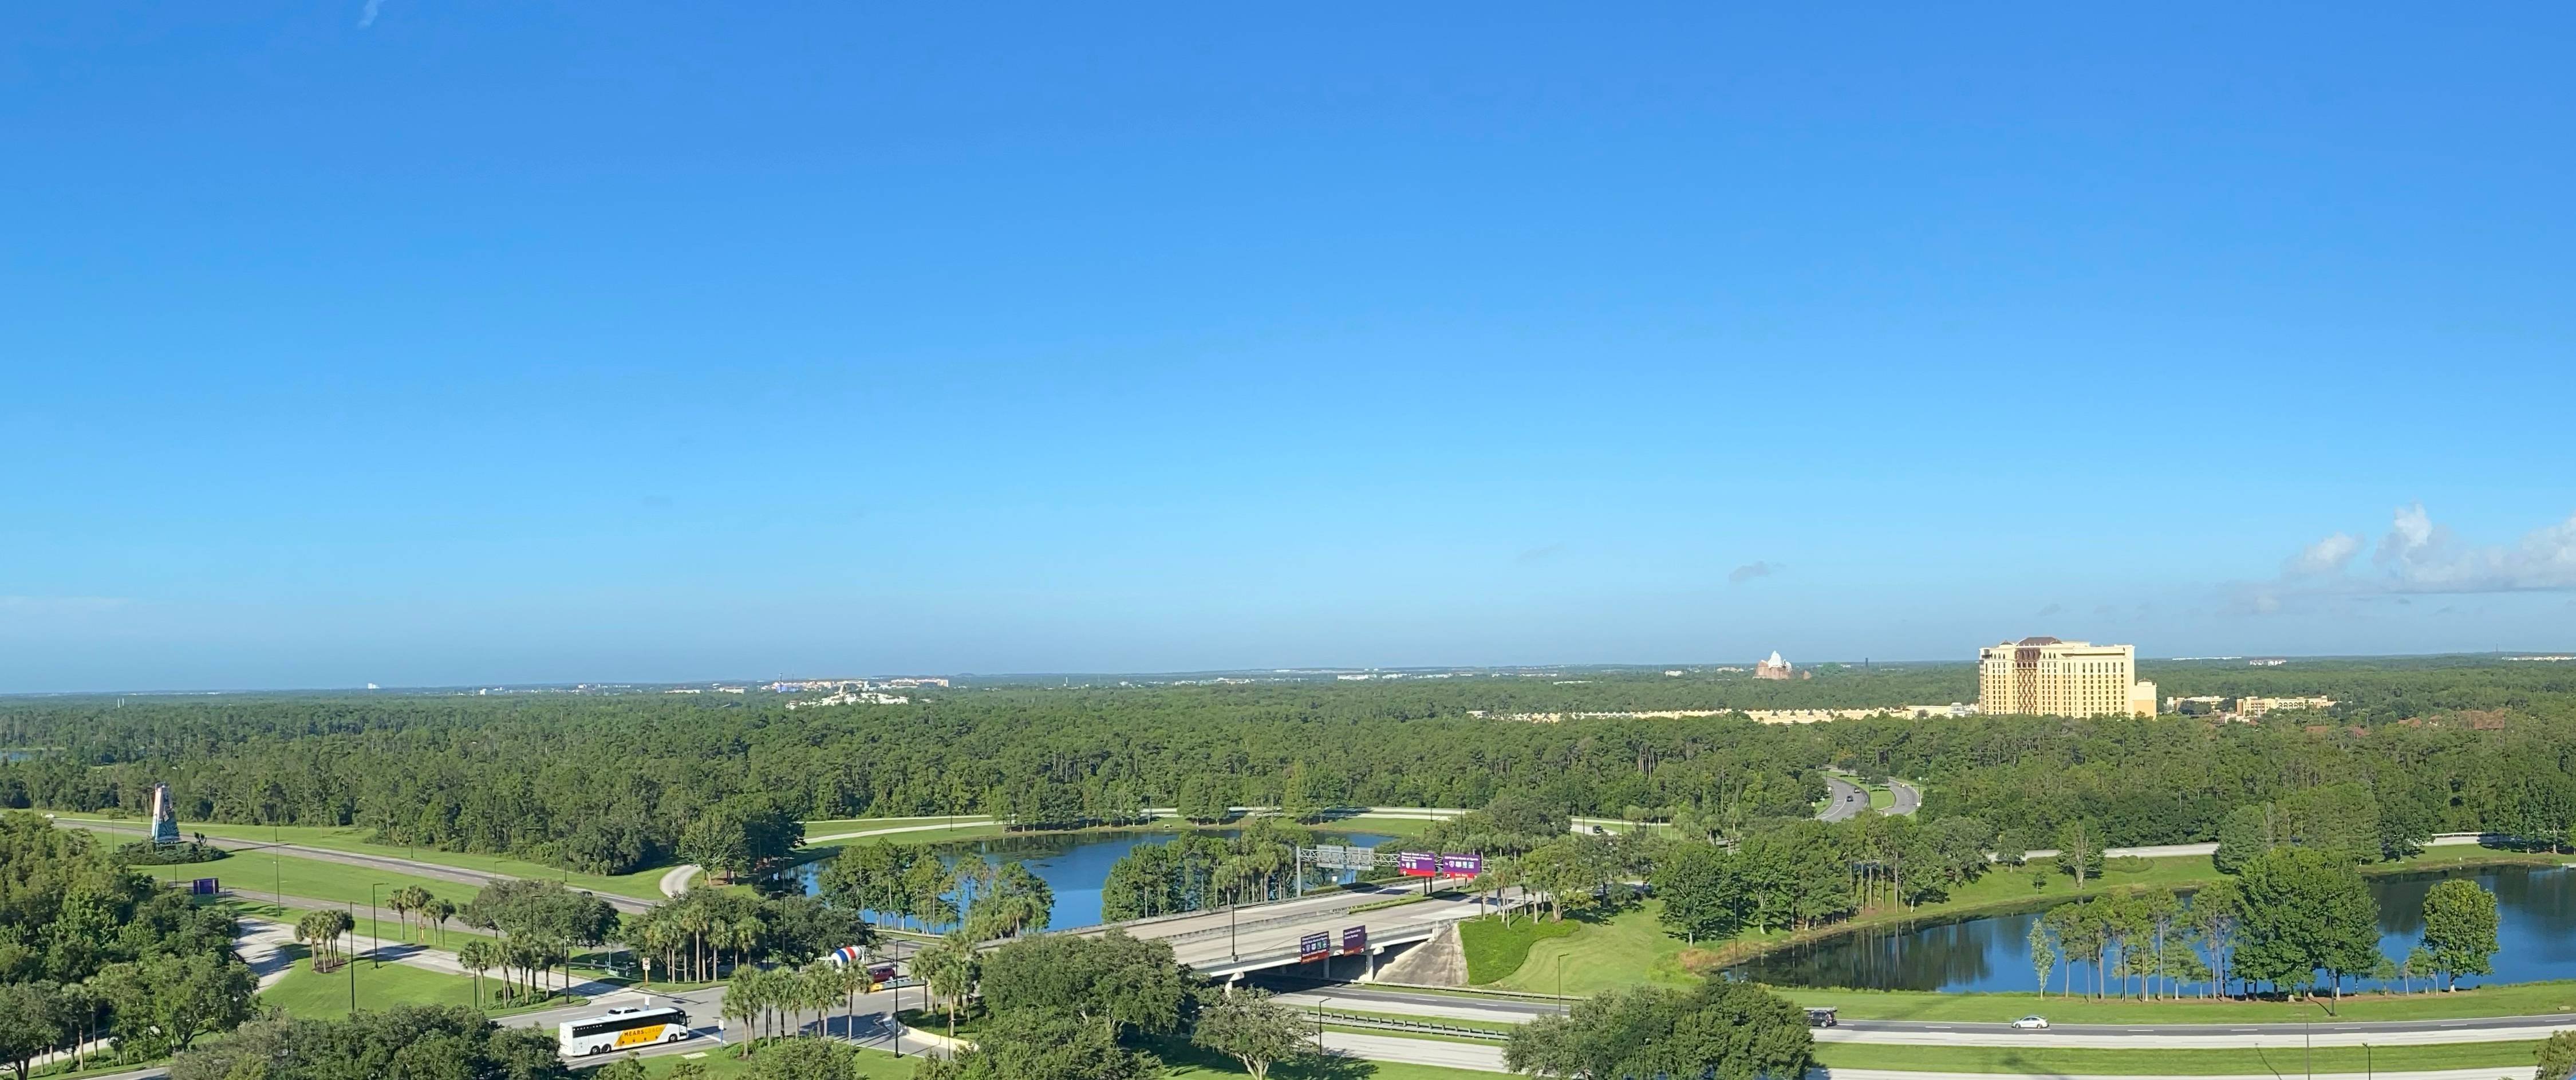 The view of Walt Disney World from the Vue